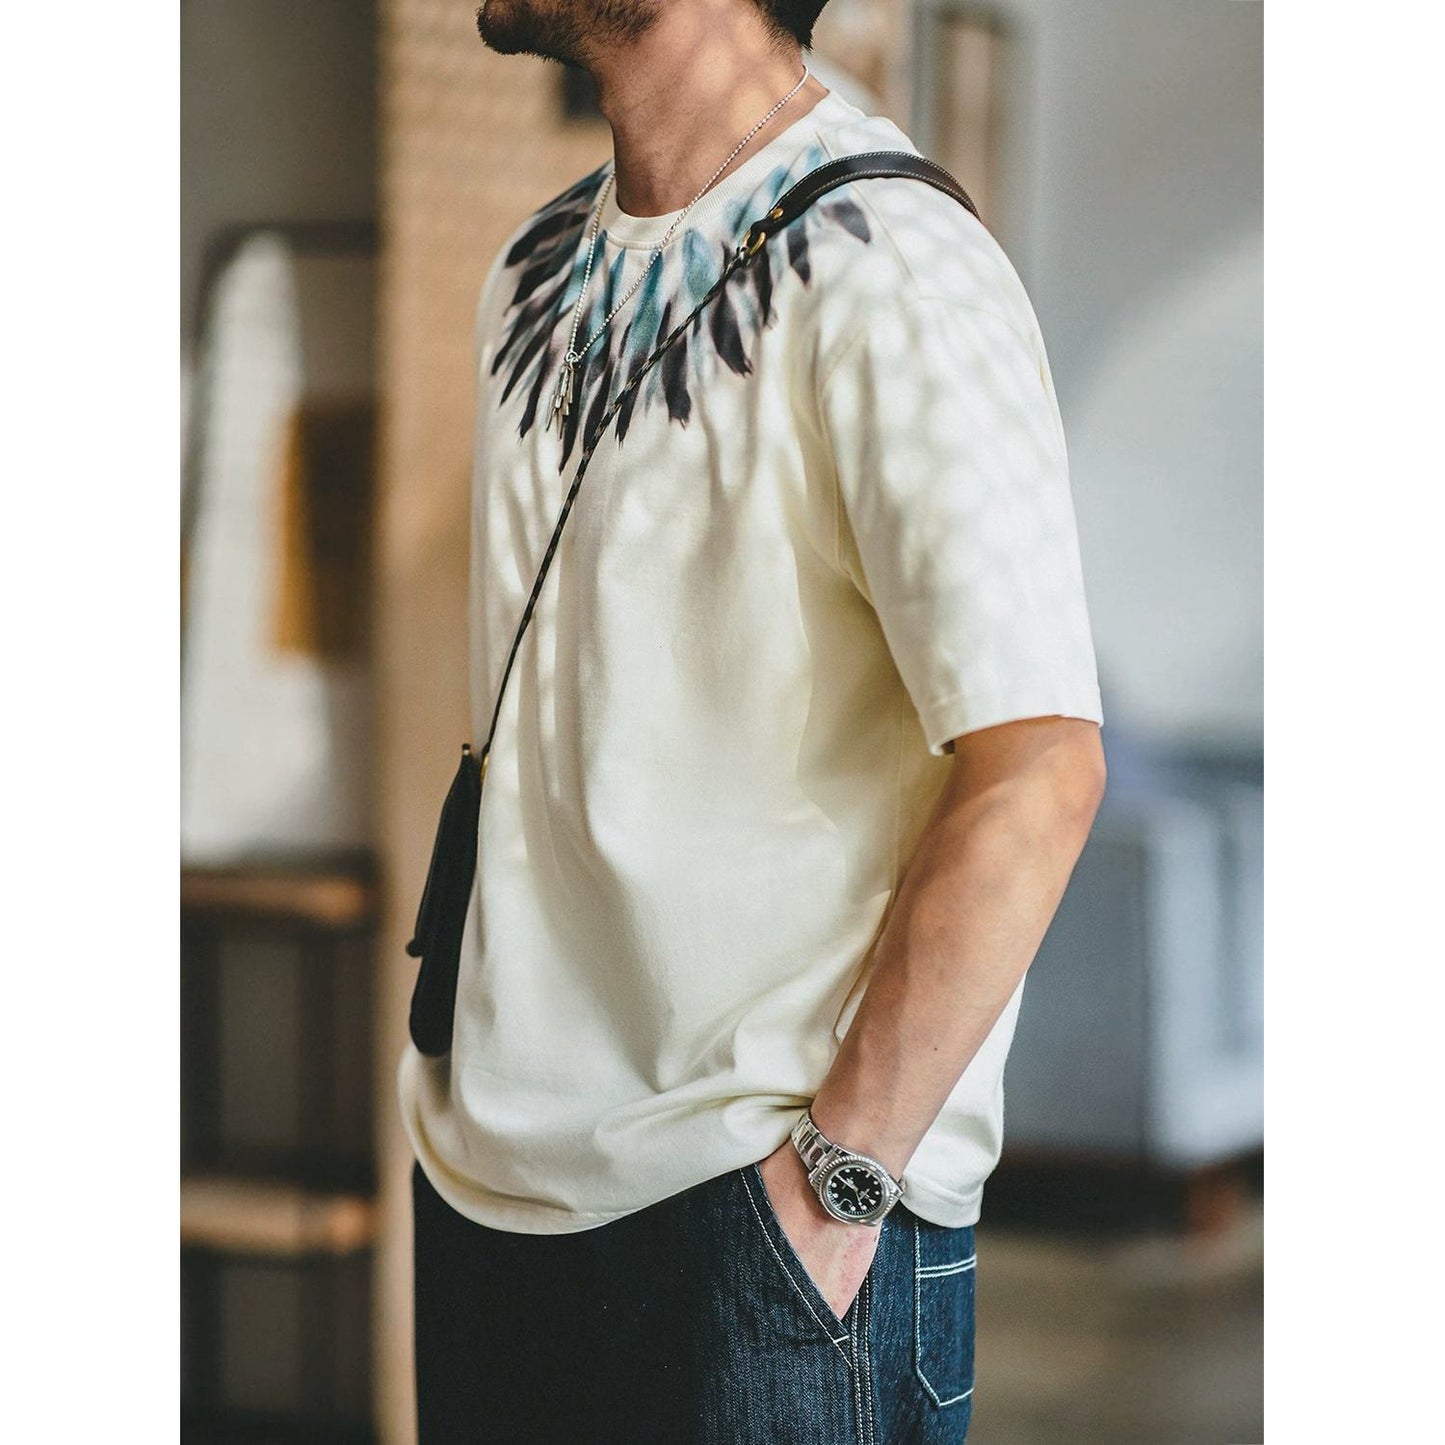 Retro Indian-Inspired Feather Round Neck Short Sleeve Tee